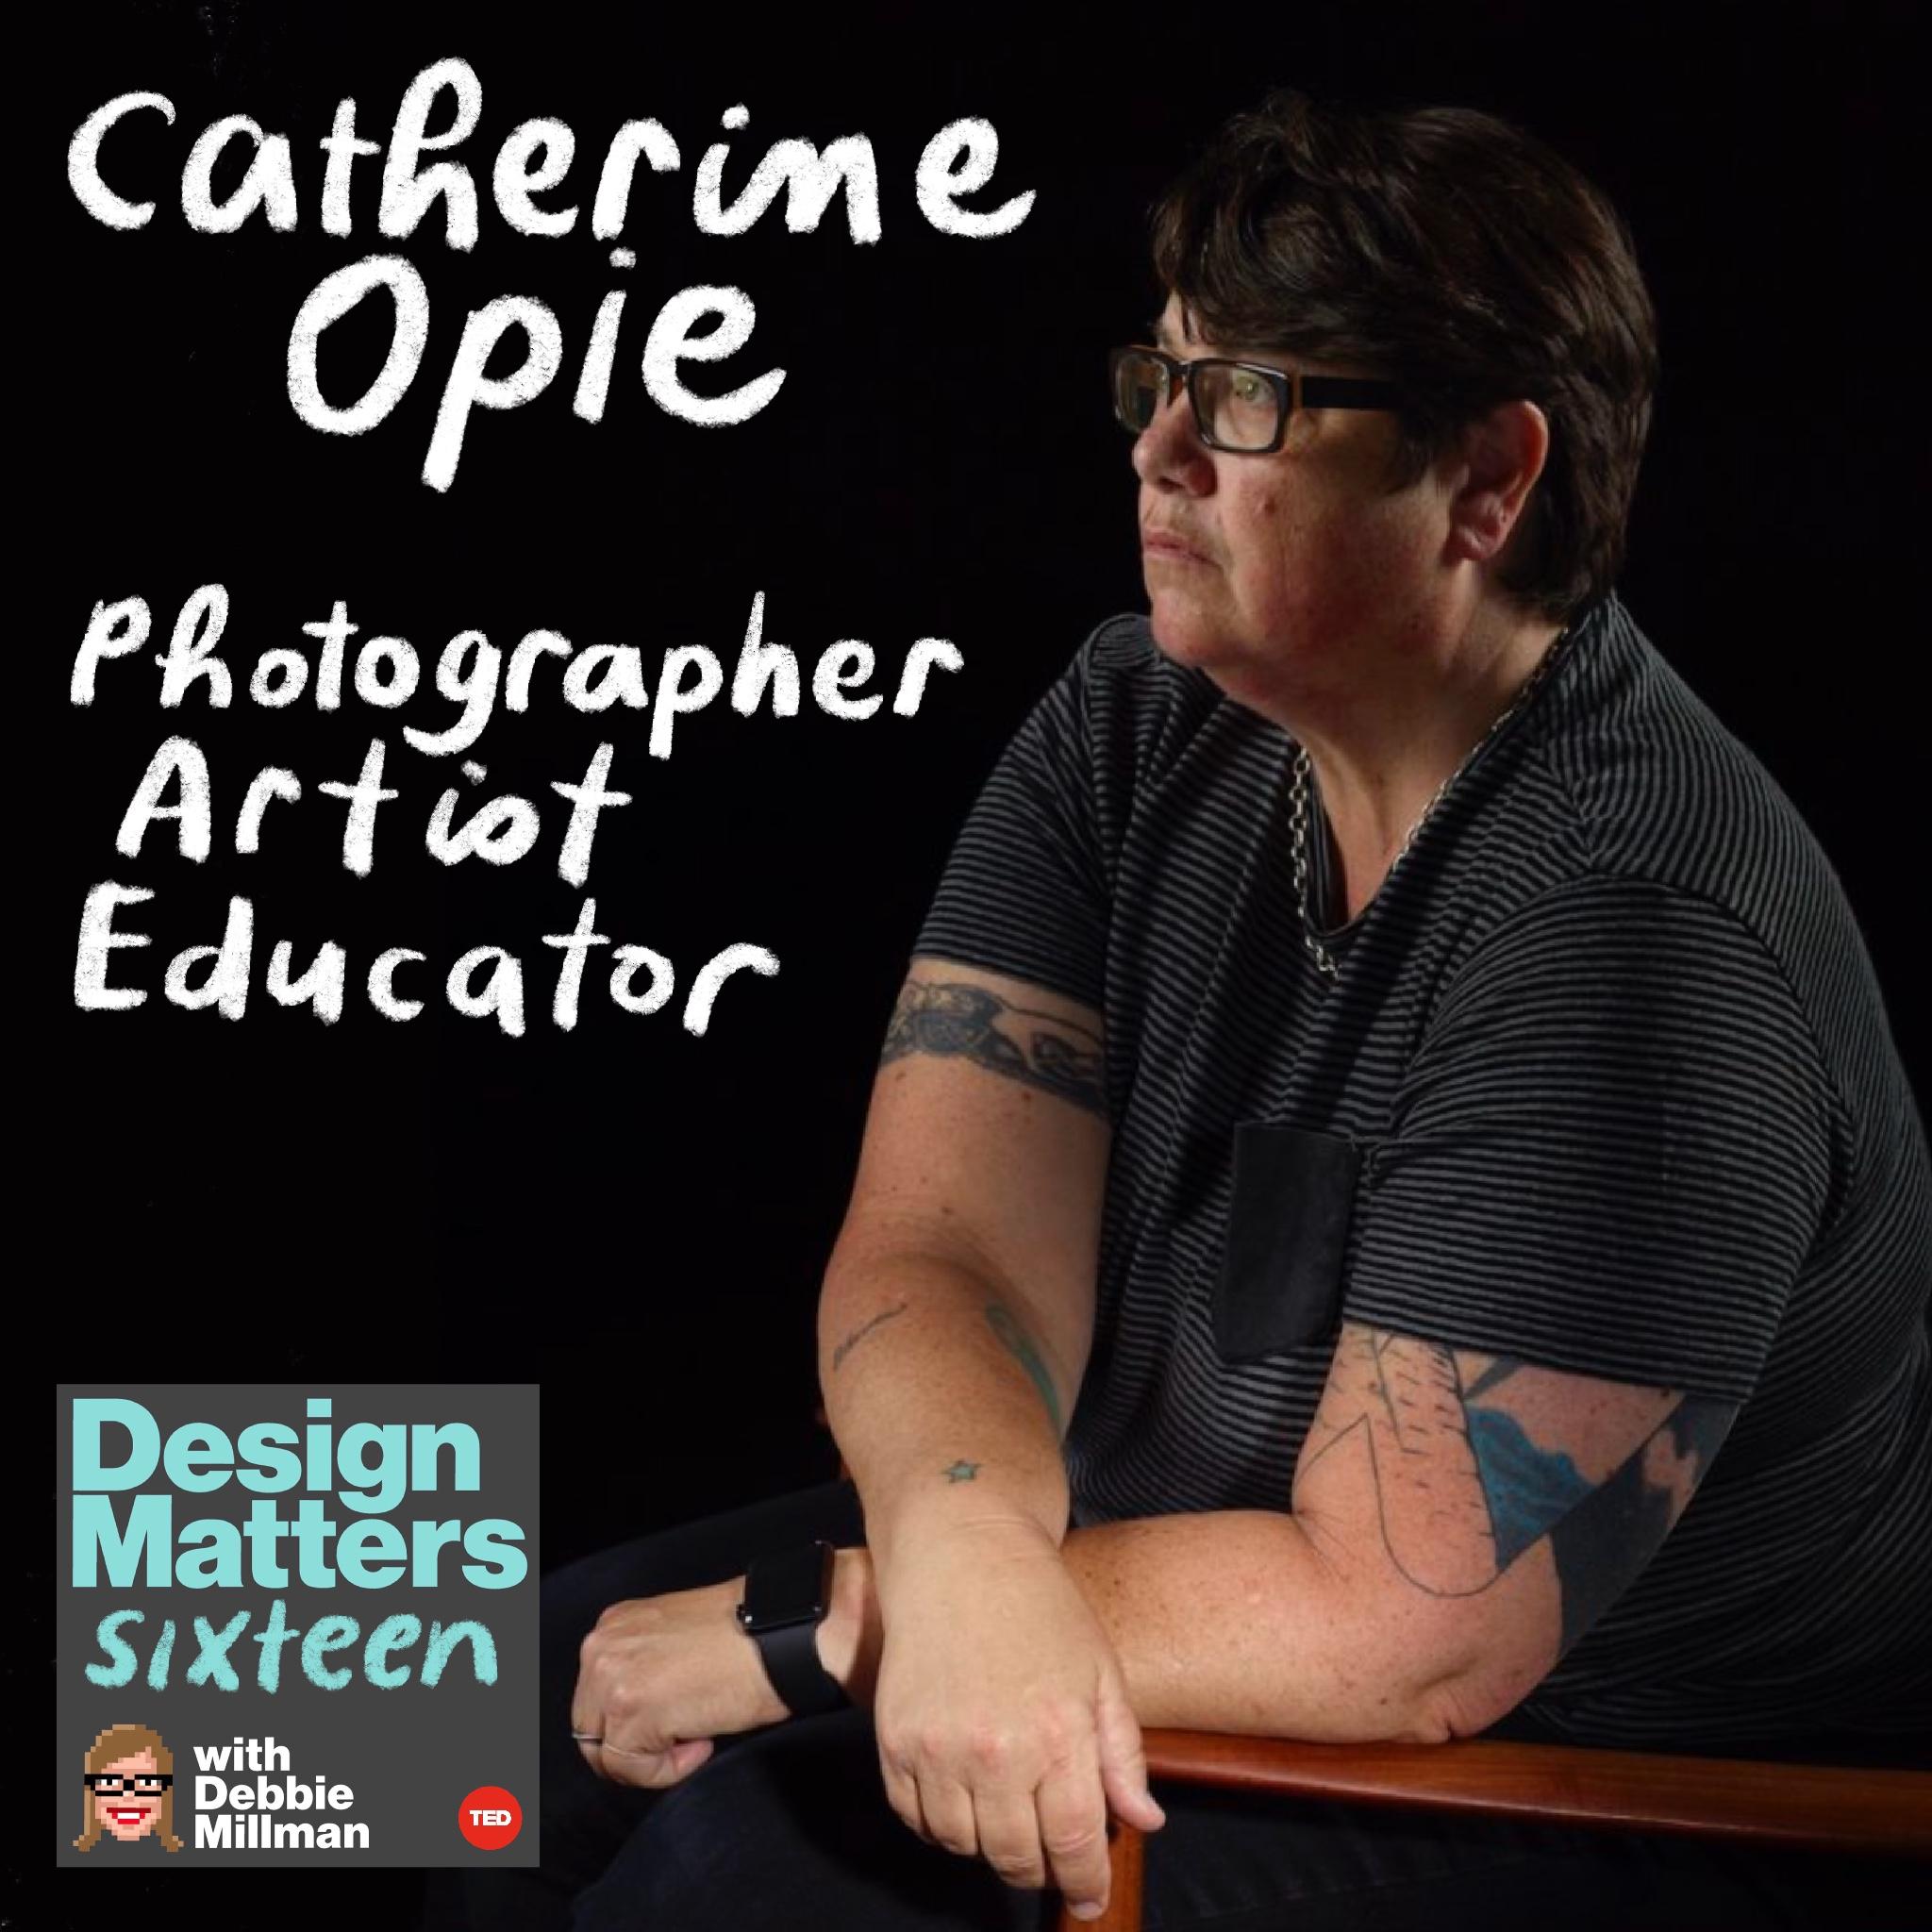 Thumbnail for "Catherine Opie".